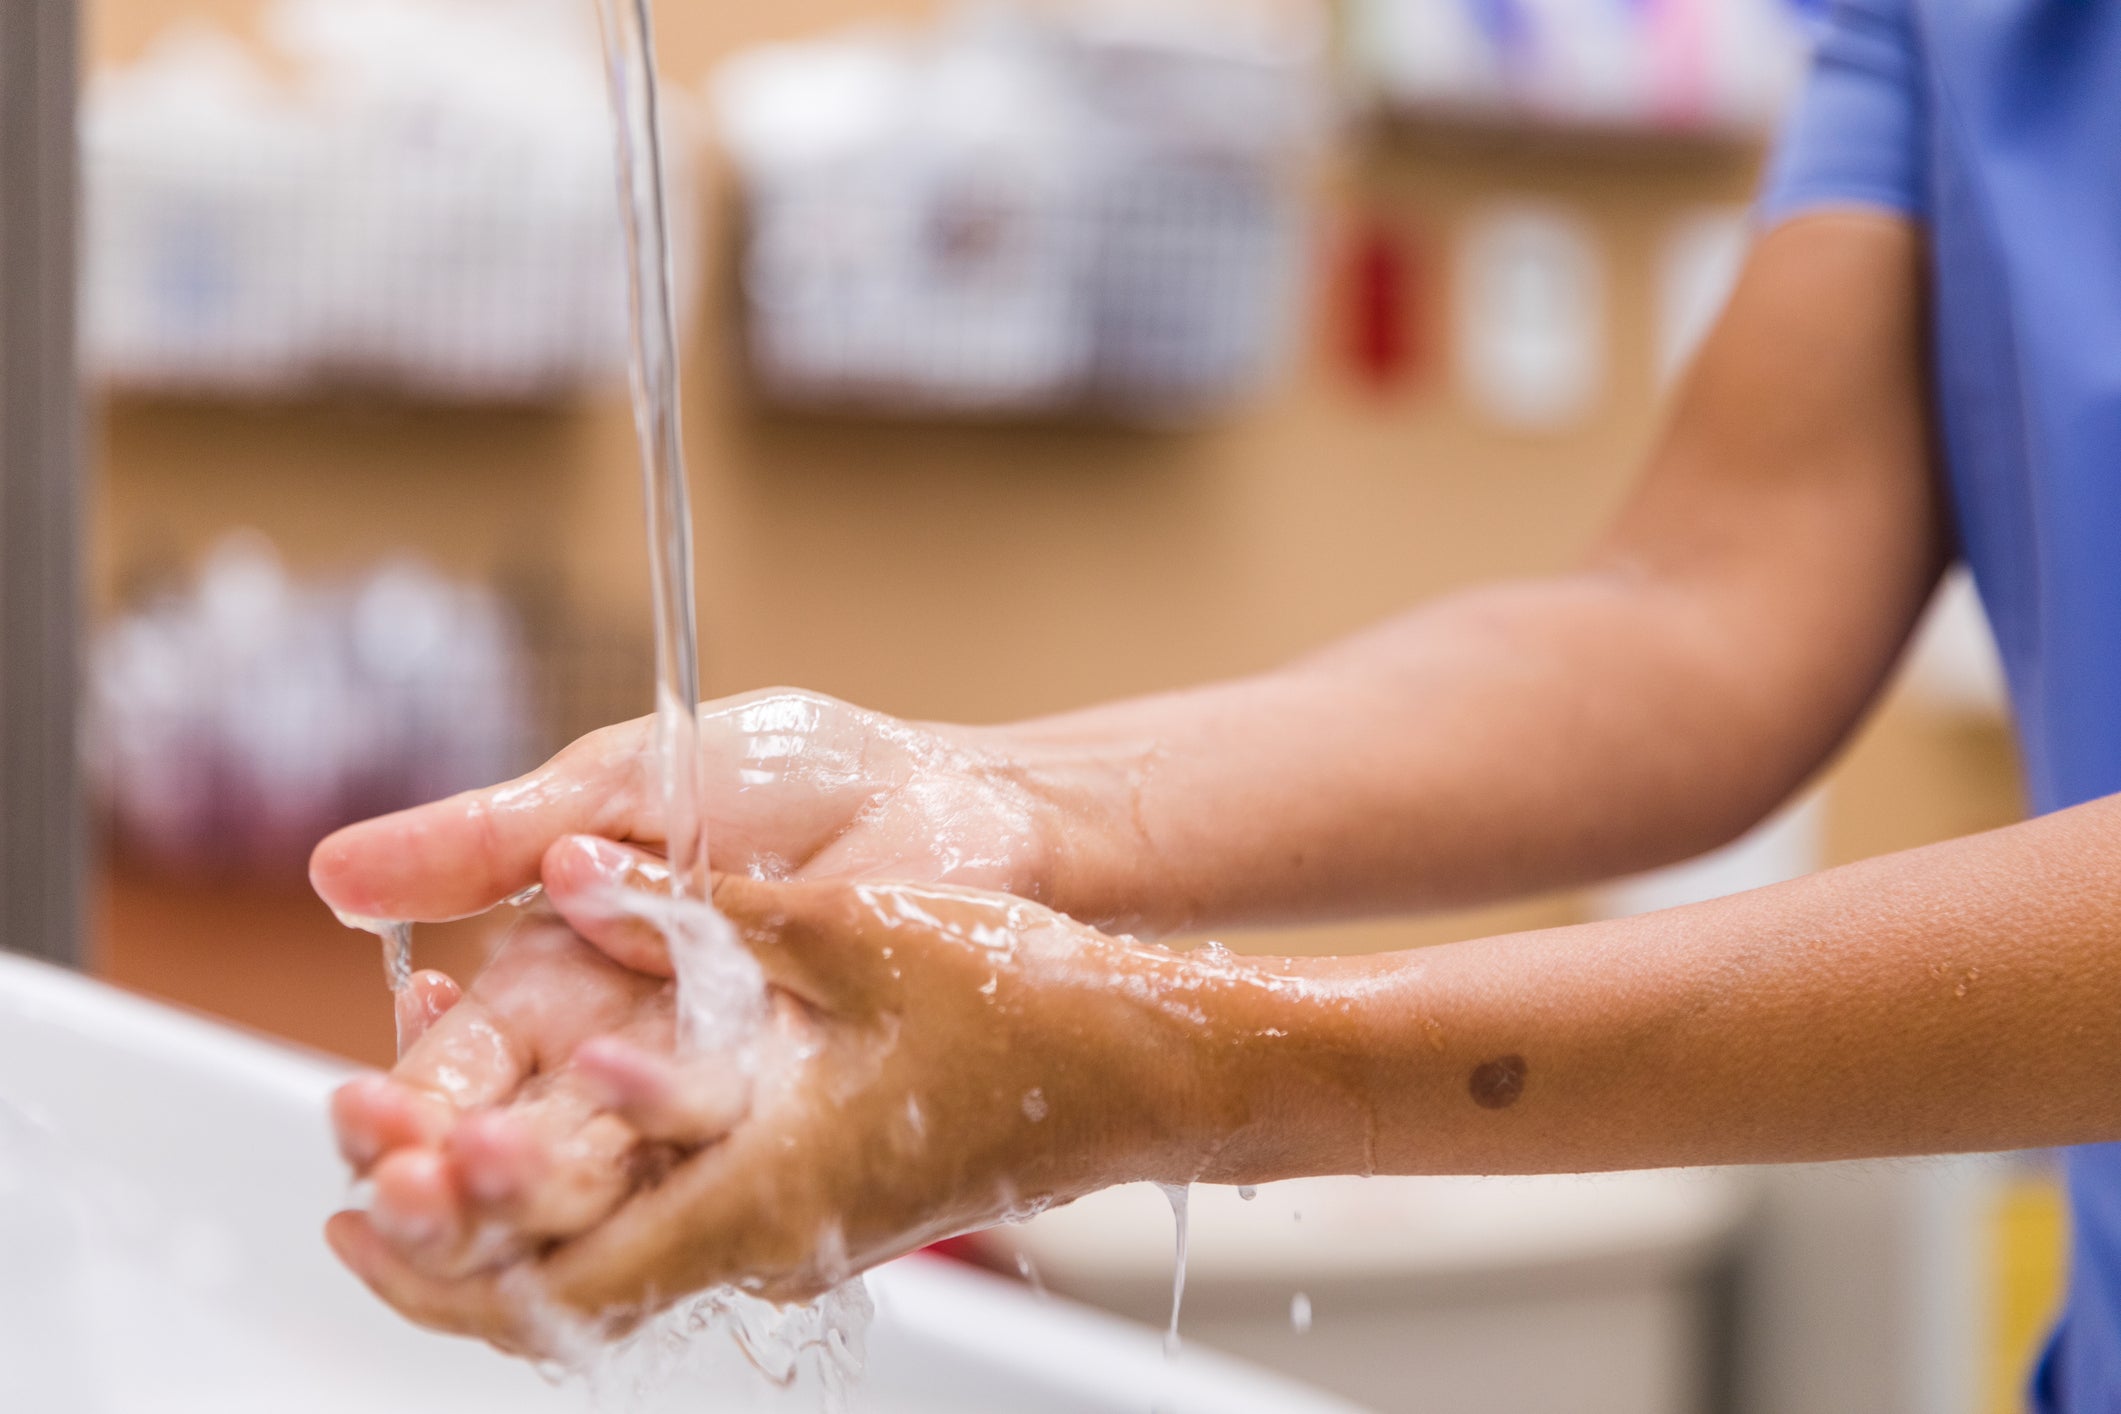 The NHS recommends that you wash your hands with warm water and soap regularly